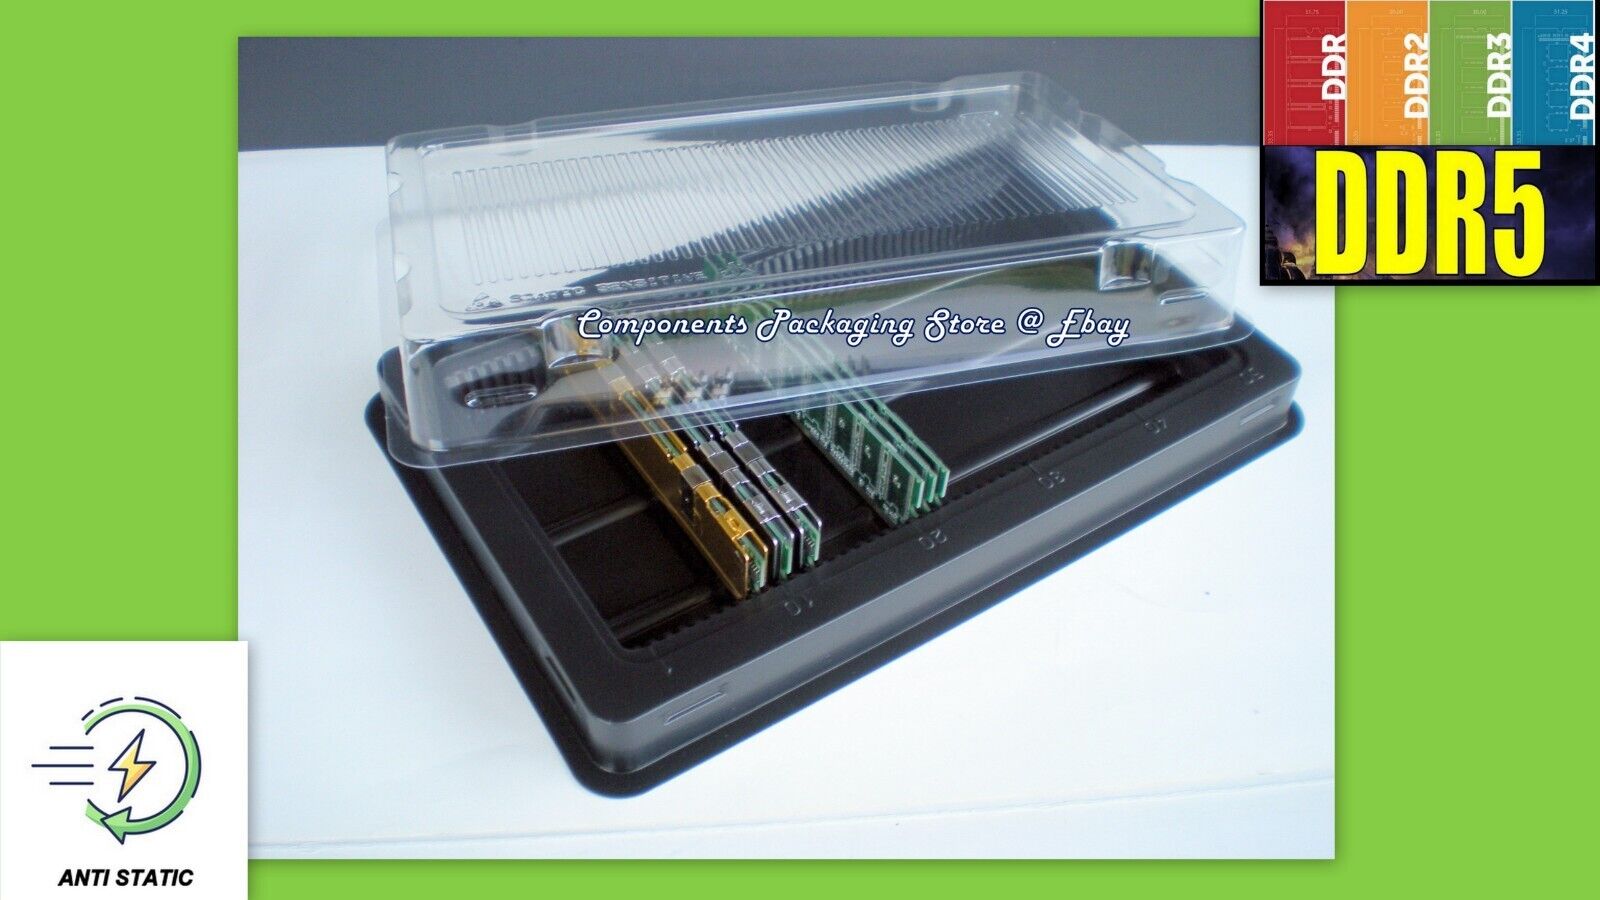 5 Computer Memory Packaging Tray Case for Desktop PC DDR Modules - Fits 250 DIMM